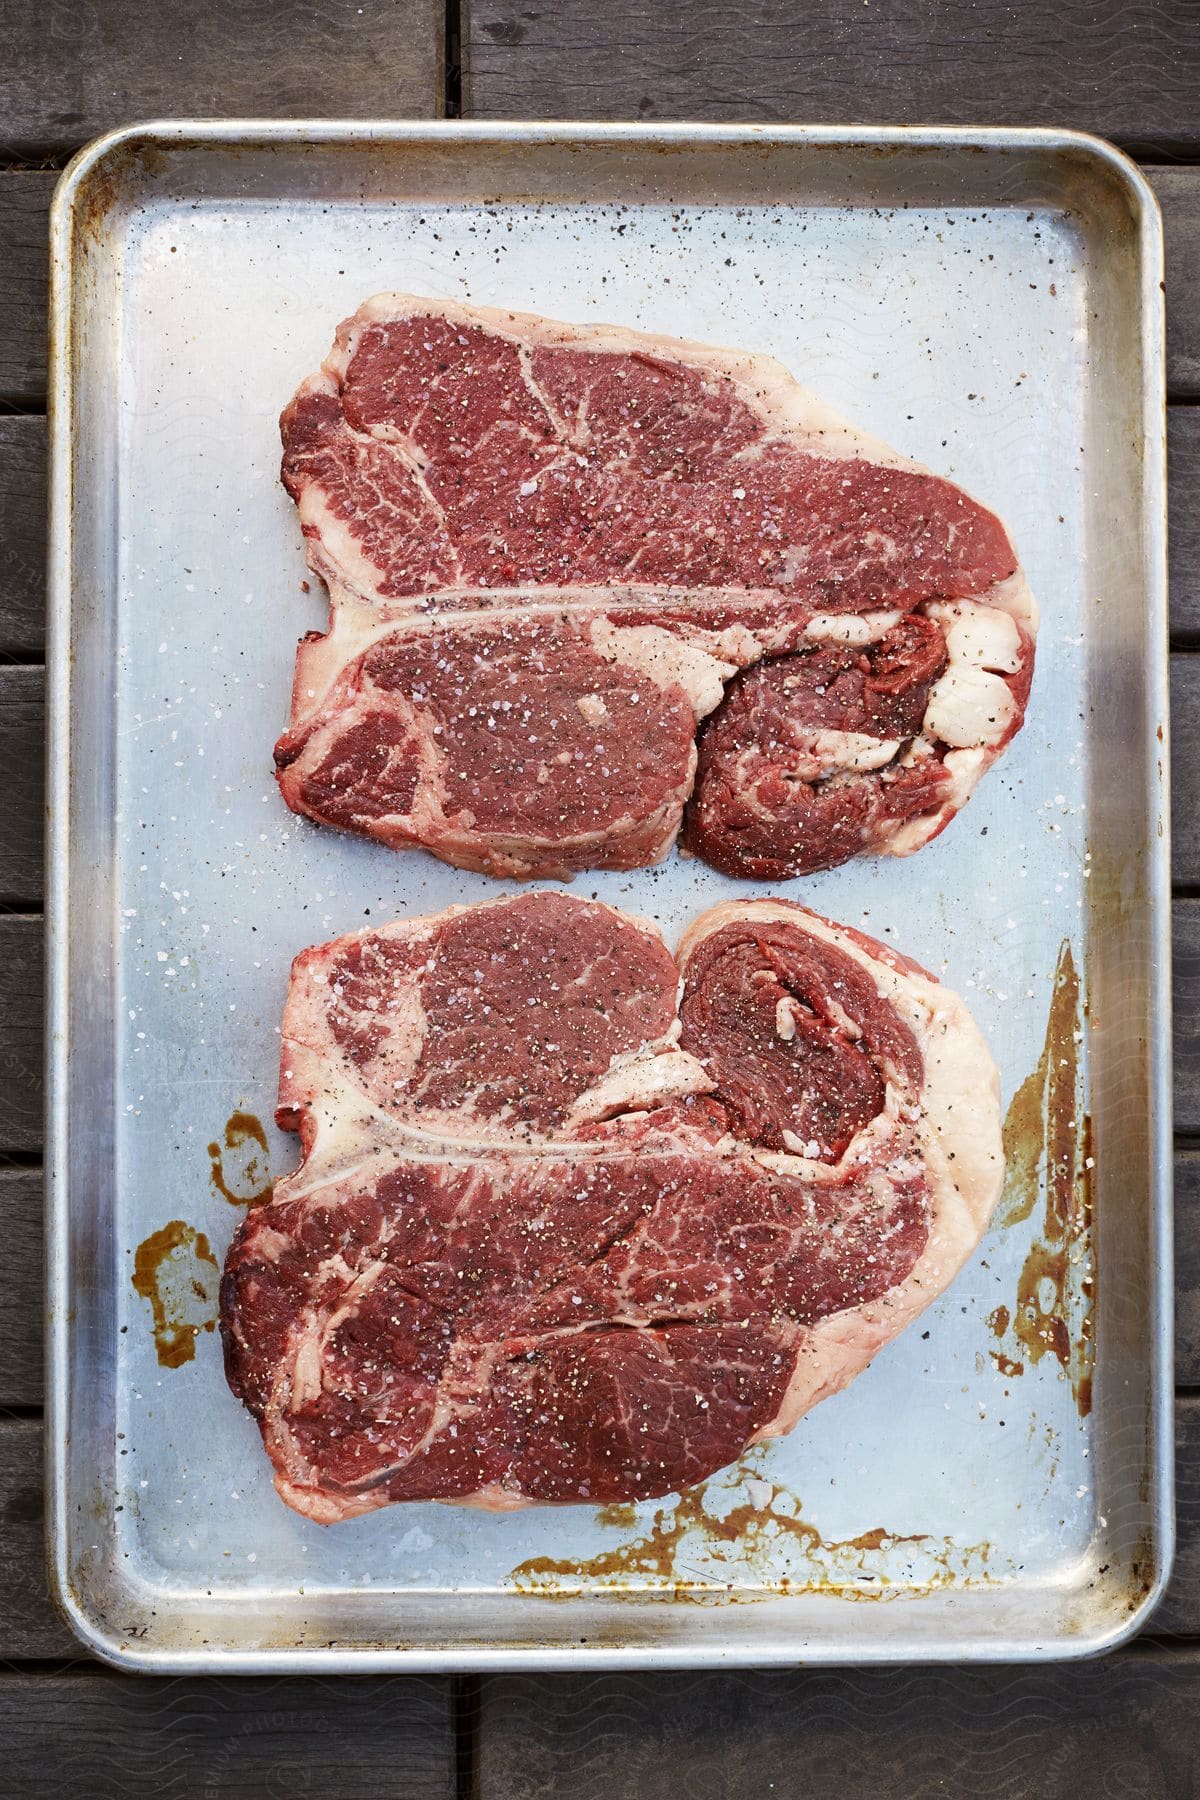 Stock photo of a steak is seen on a pan